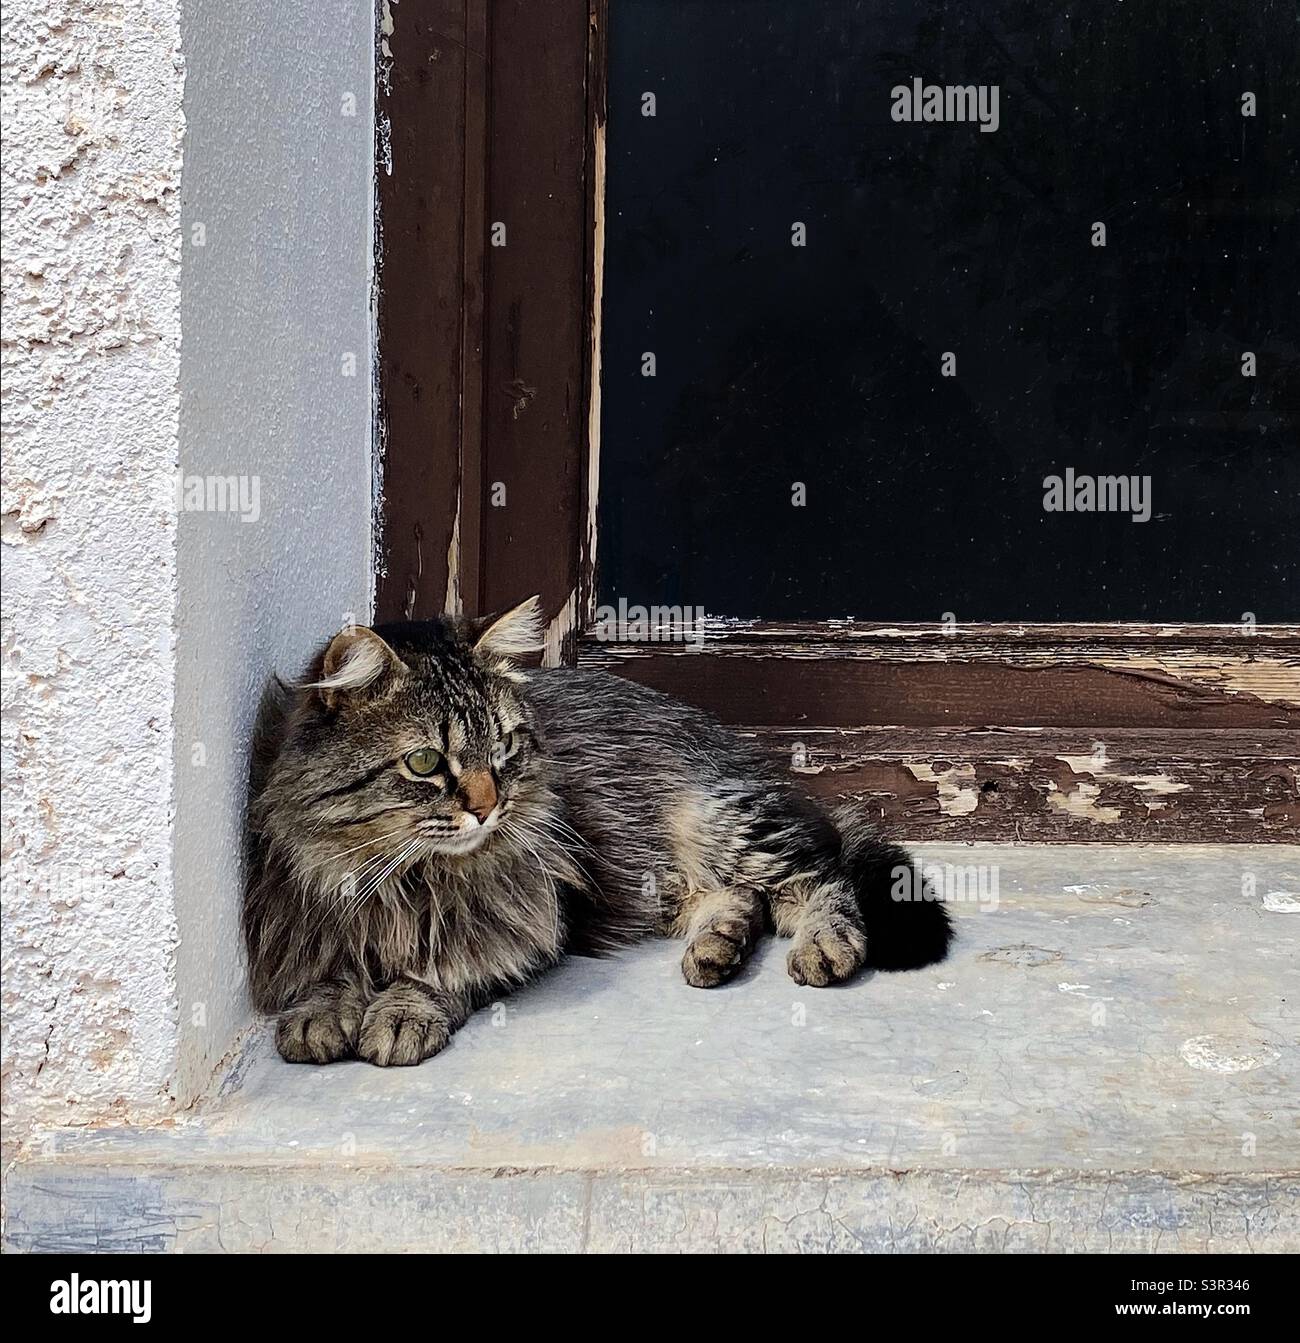 A long haired tabby cat is perched on the concrete exterior window sill observing movements nearby. The brown paint on the wooden window frame is flaking. Stock Photo